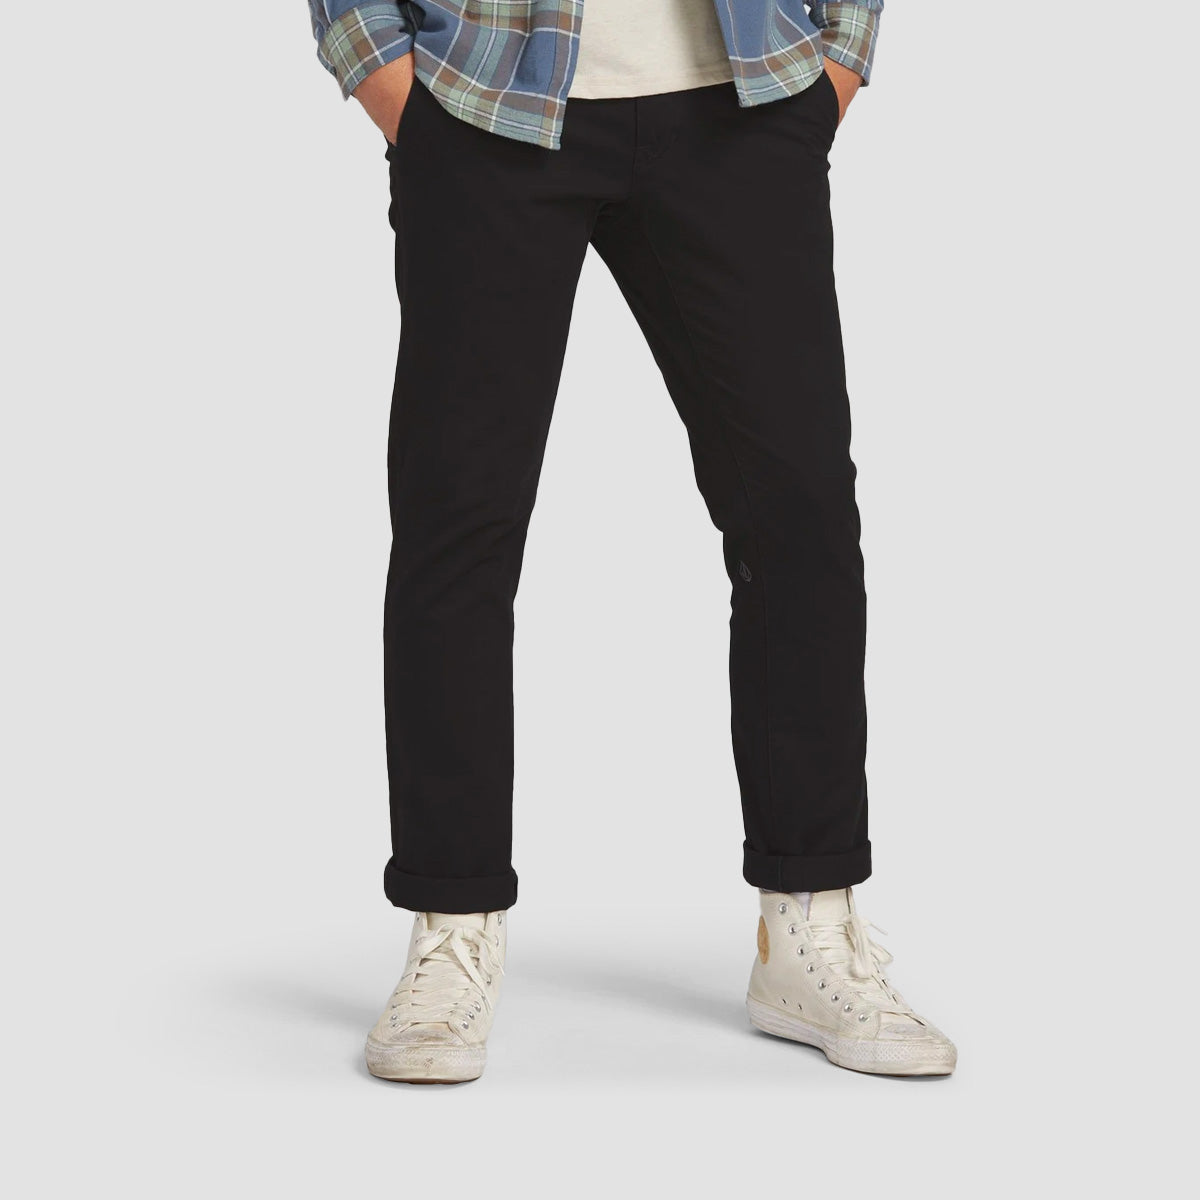 RVCA The Weekend Stretch Chino Pants